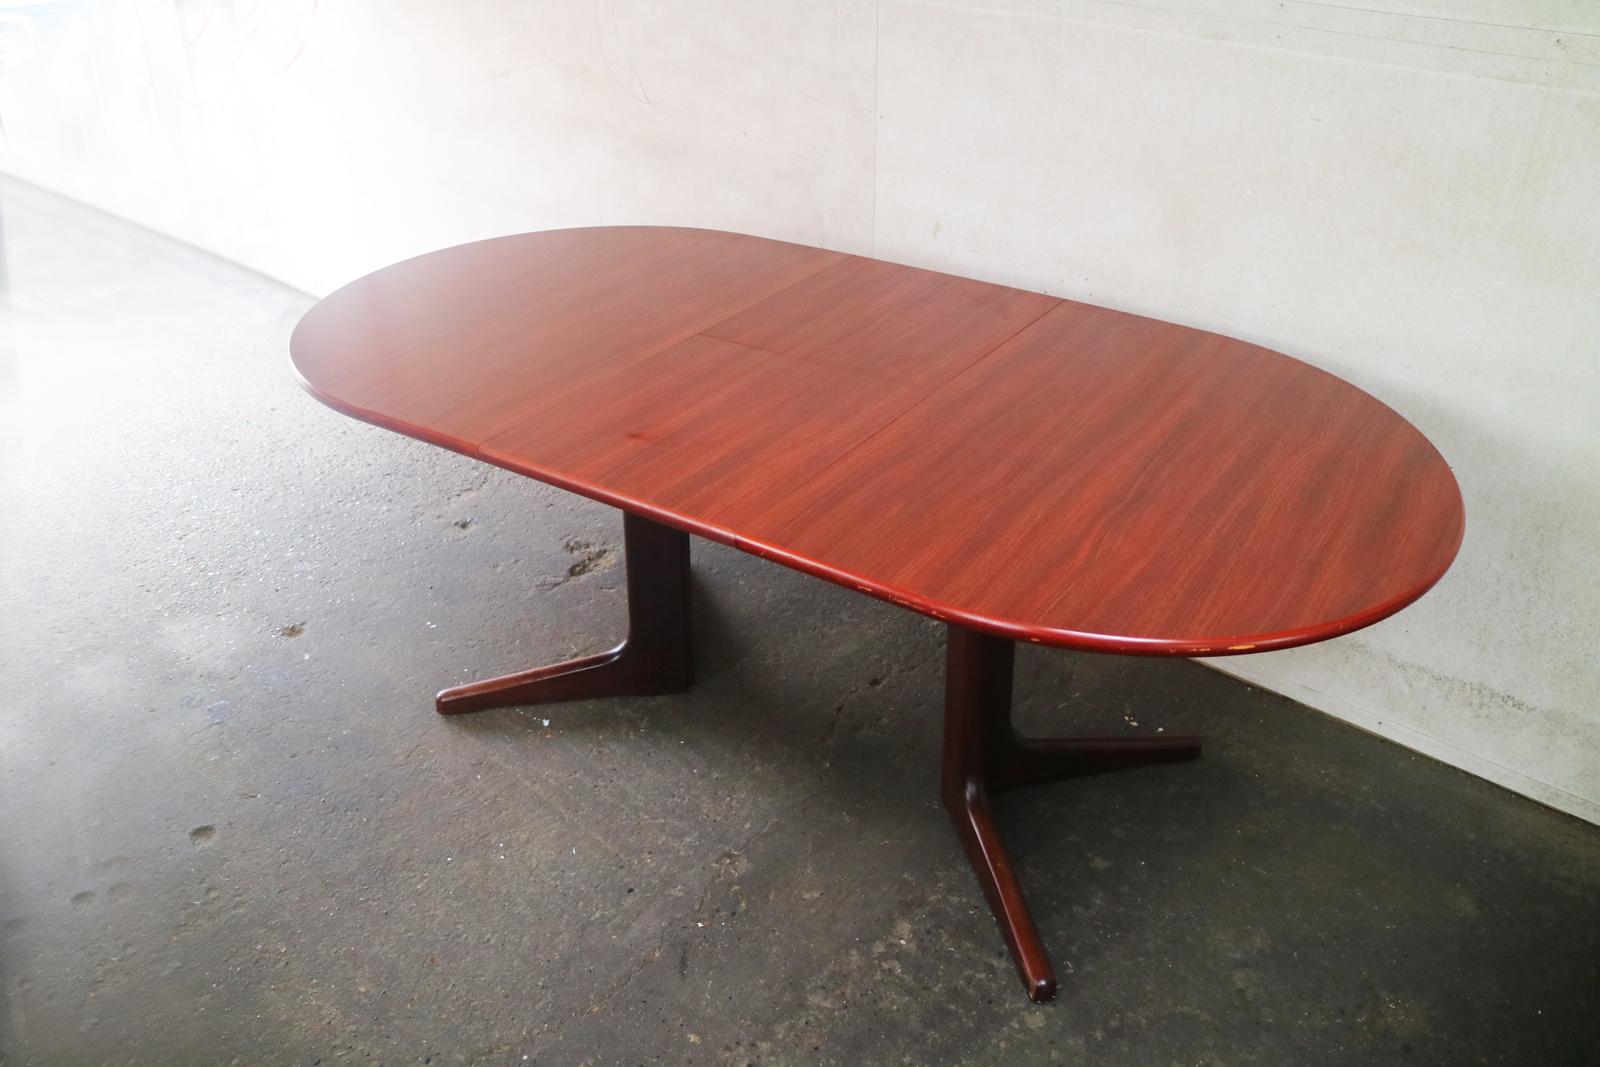 Extending dining table produced by Skovby in Denmark in the 1970s it features a fold in middle section. 

The dark teak wood shows beautiful grain, and is in great condition.

Sits on a pedestal base with splayed feet, legs are removable for